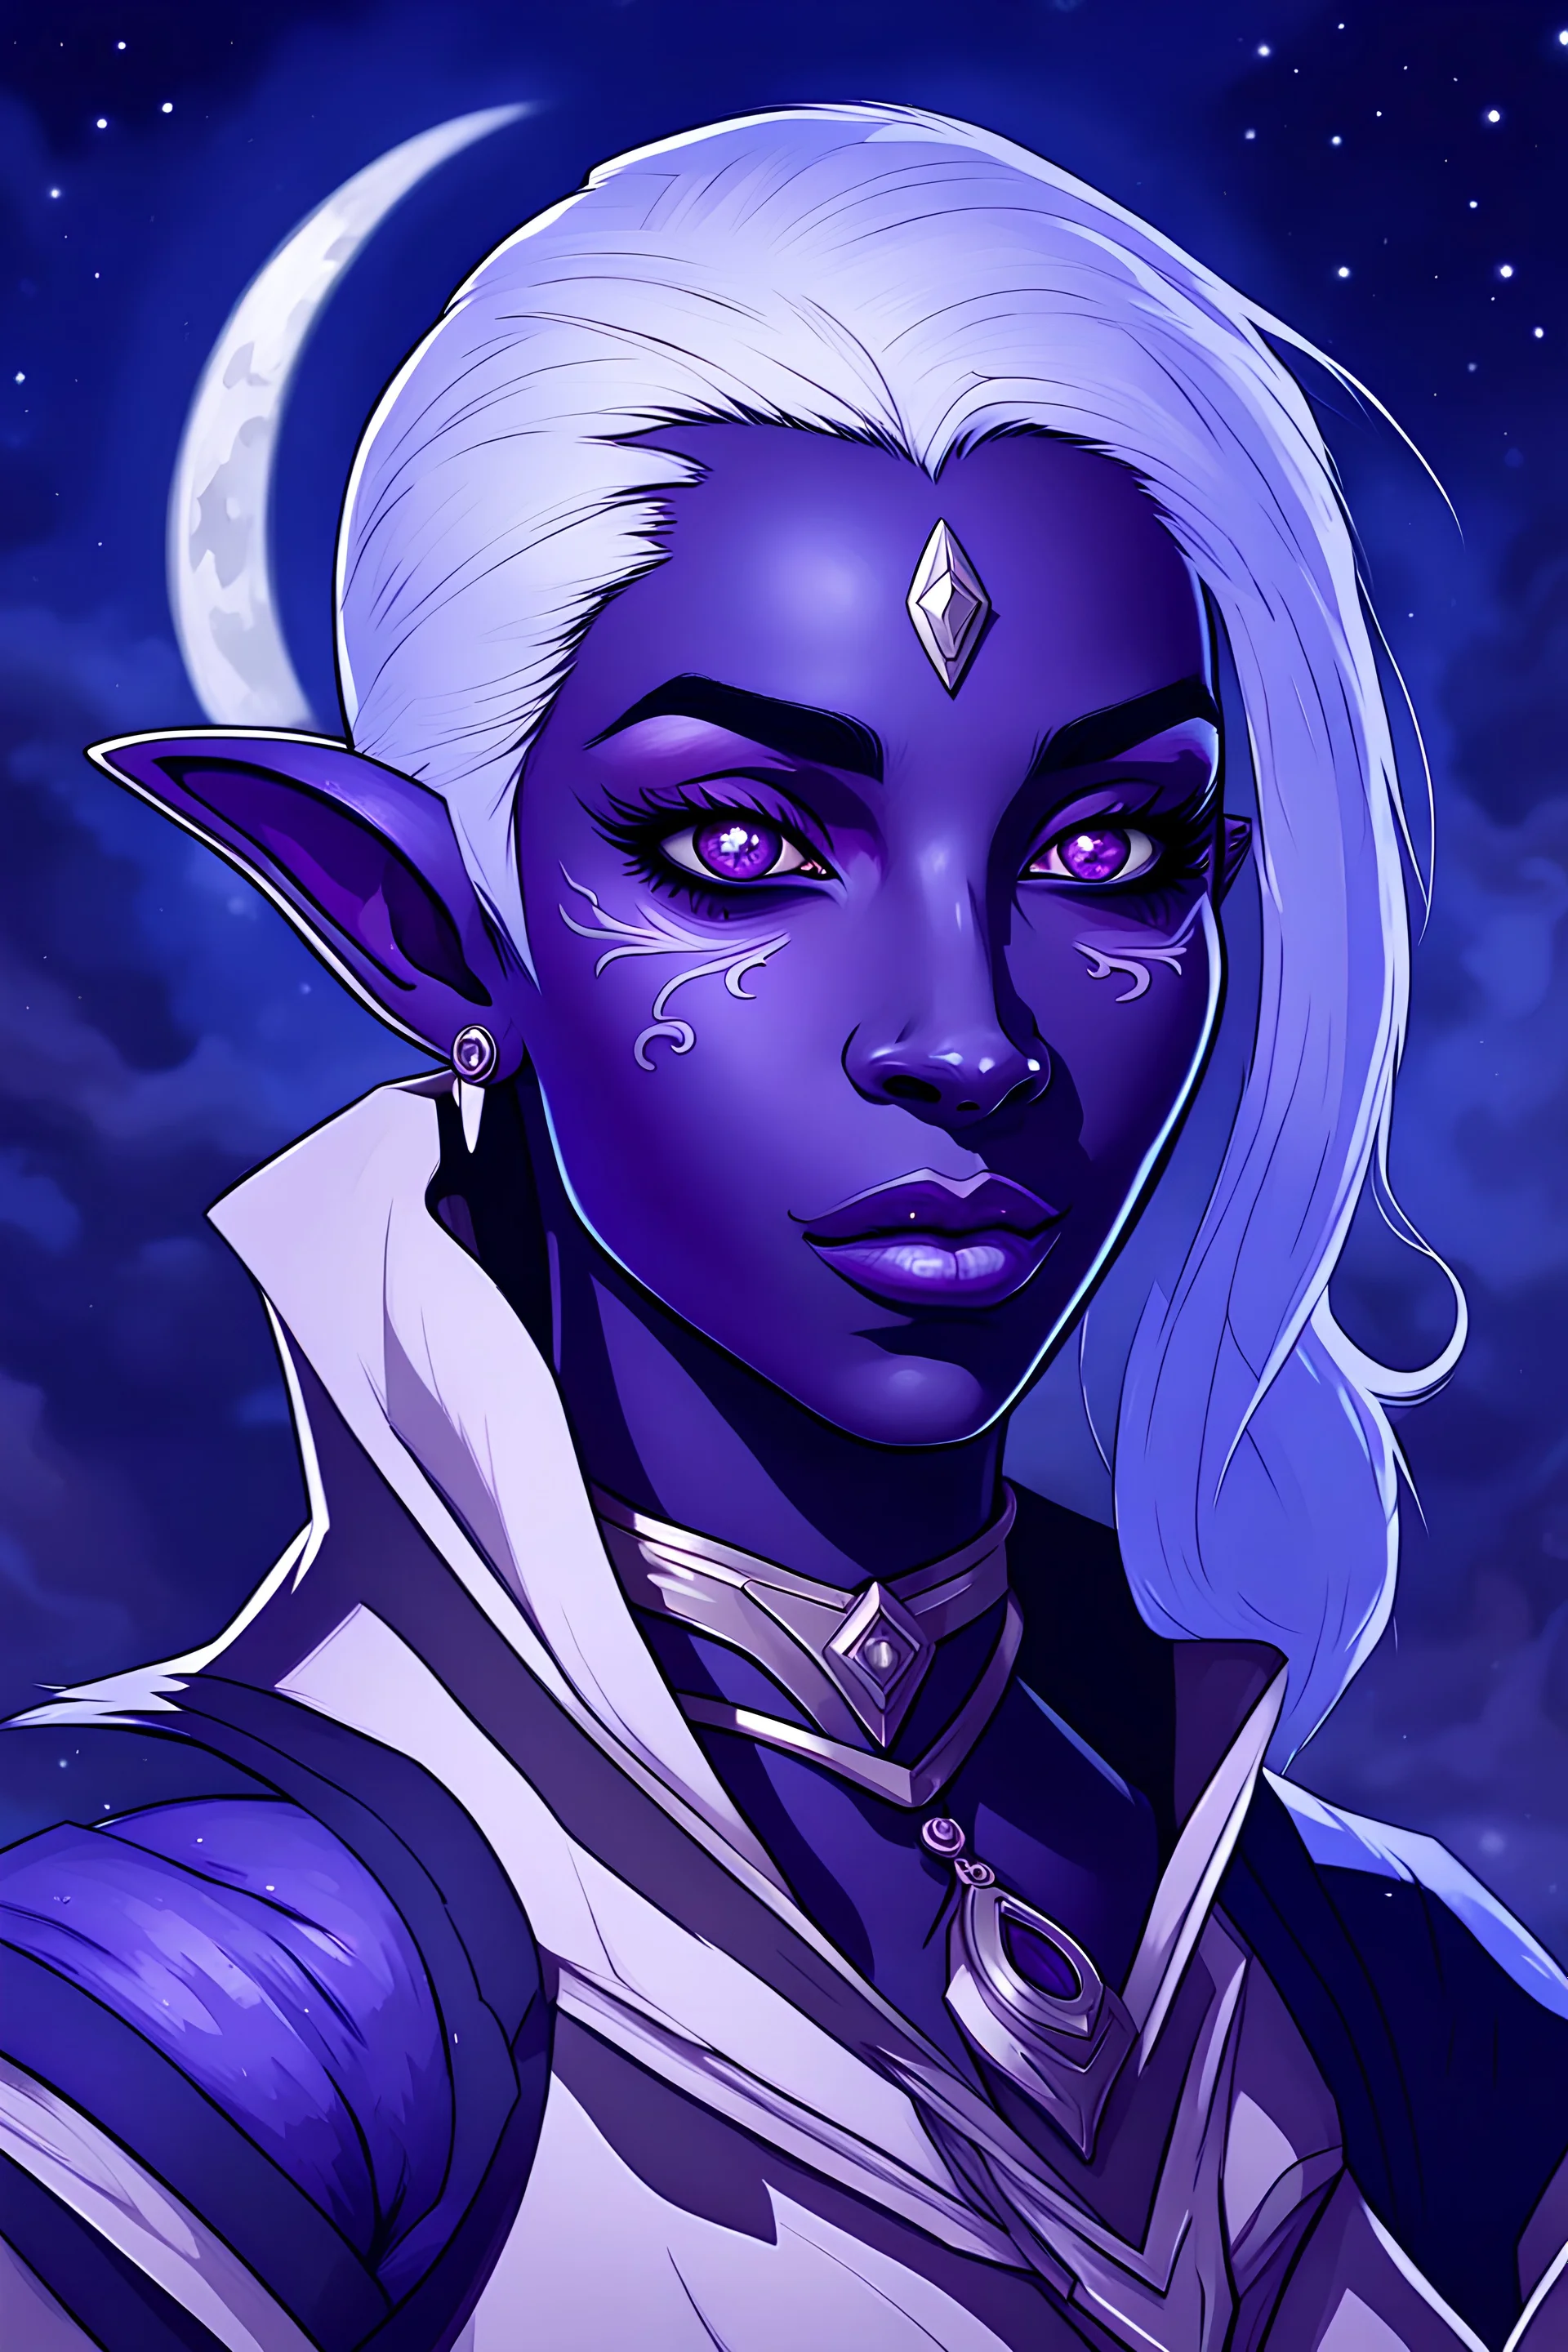 Dungeons and Dragons portrait of the face of a conventionally attractive young adult drow rogue blessed by Eilistraee. She has purple skin and is surrounded by moonlight.